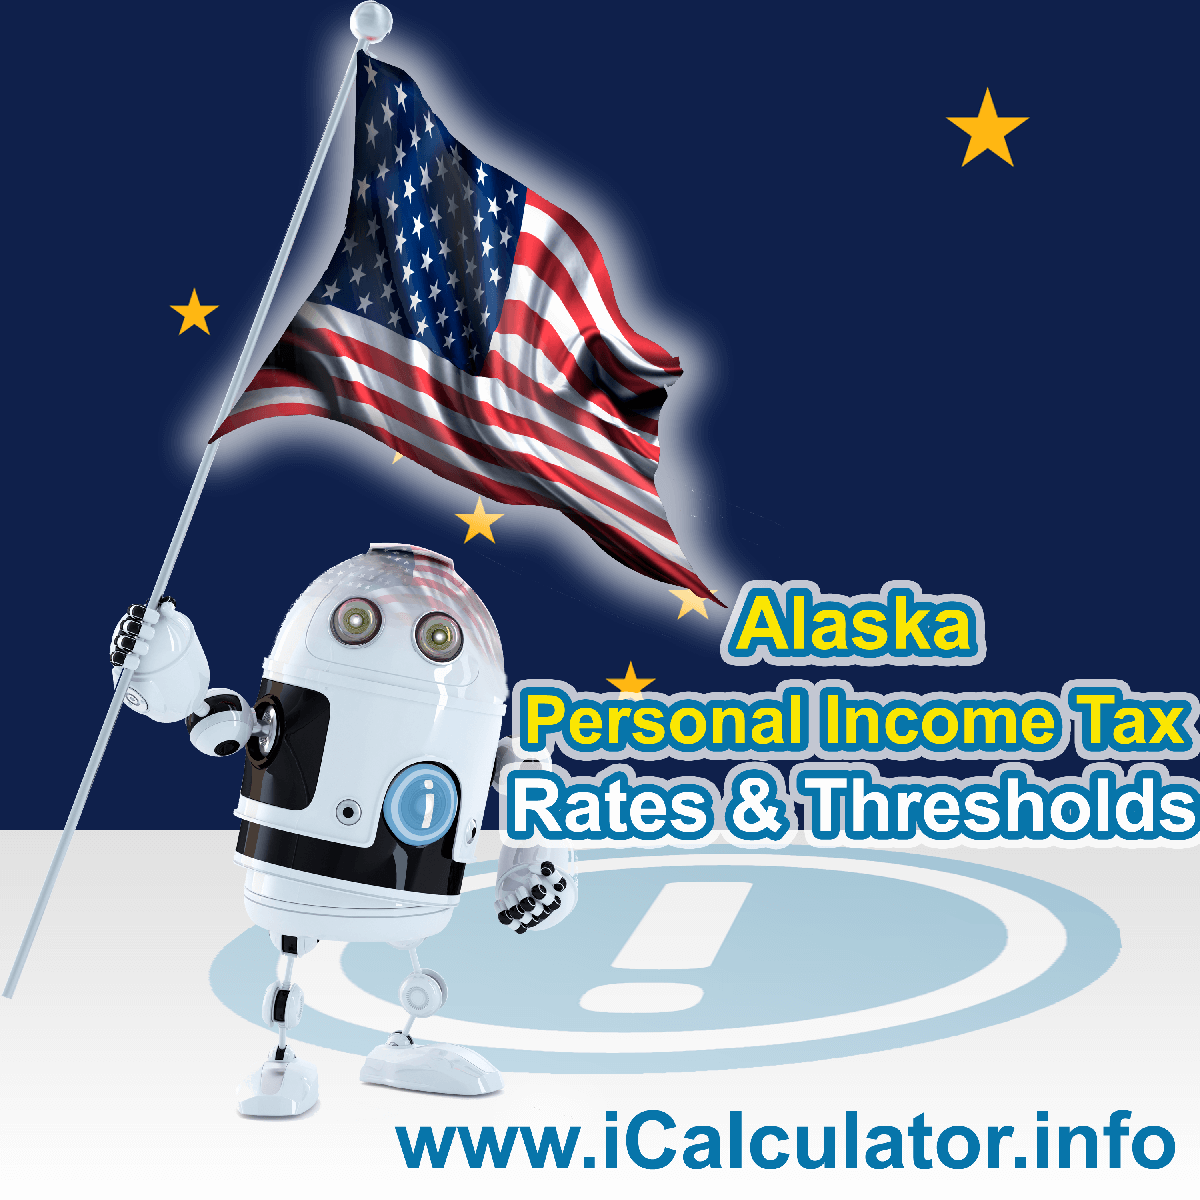 Alaska State Tax Tables 2016. This image displays details of the Alaska State Tax Tables for the 2016 tax return year which is provided in support of the 2016 US Tax Calculator